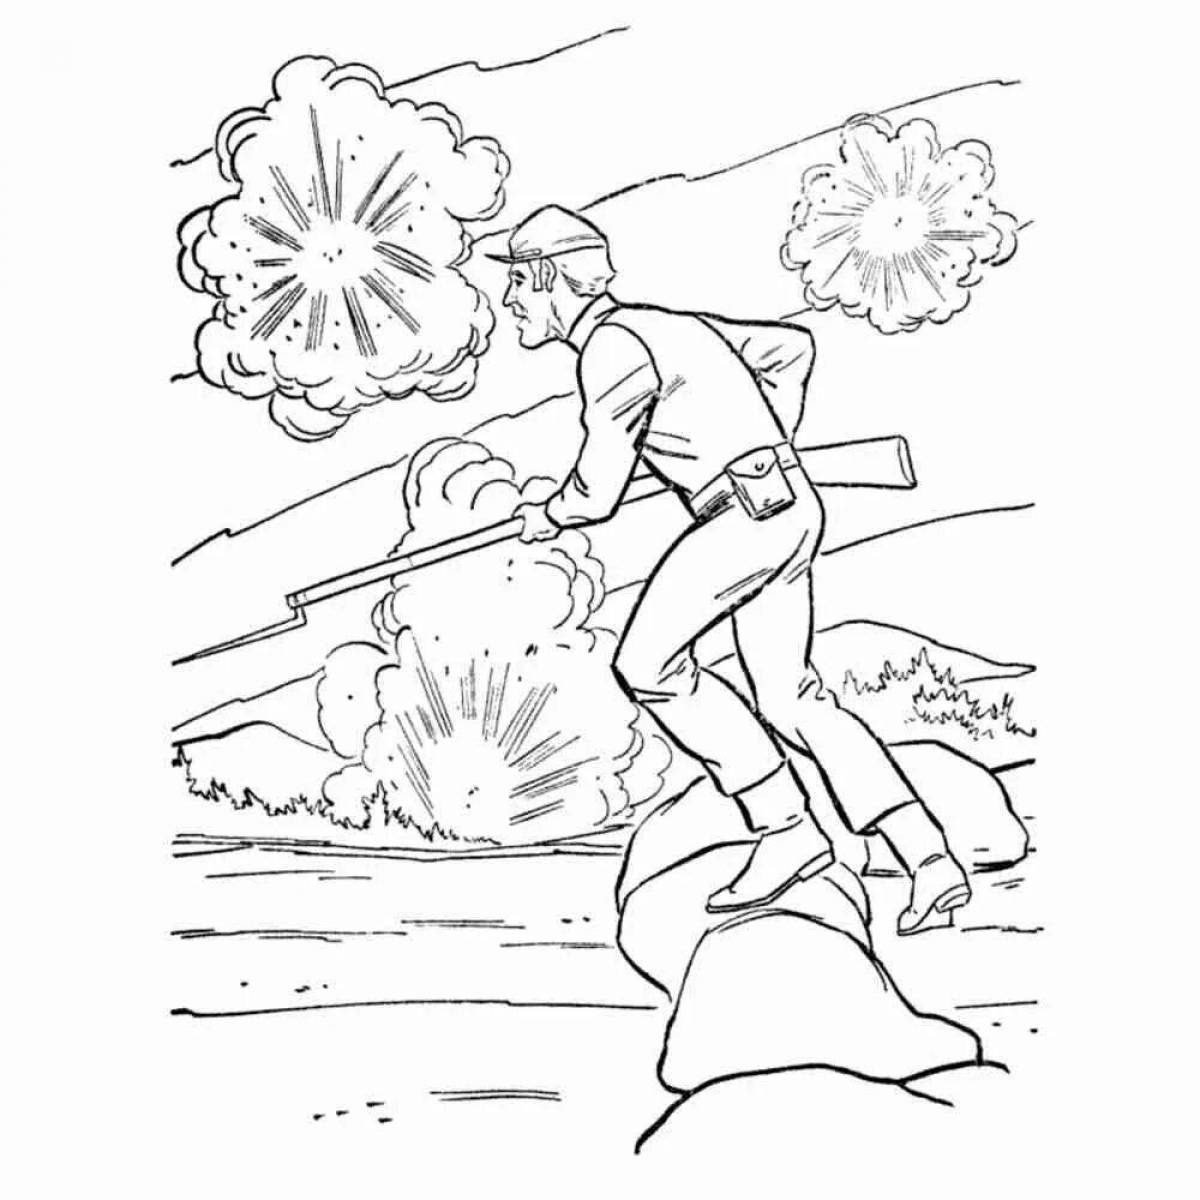 Shining war heroes coloring pages for kids